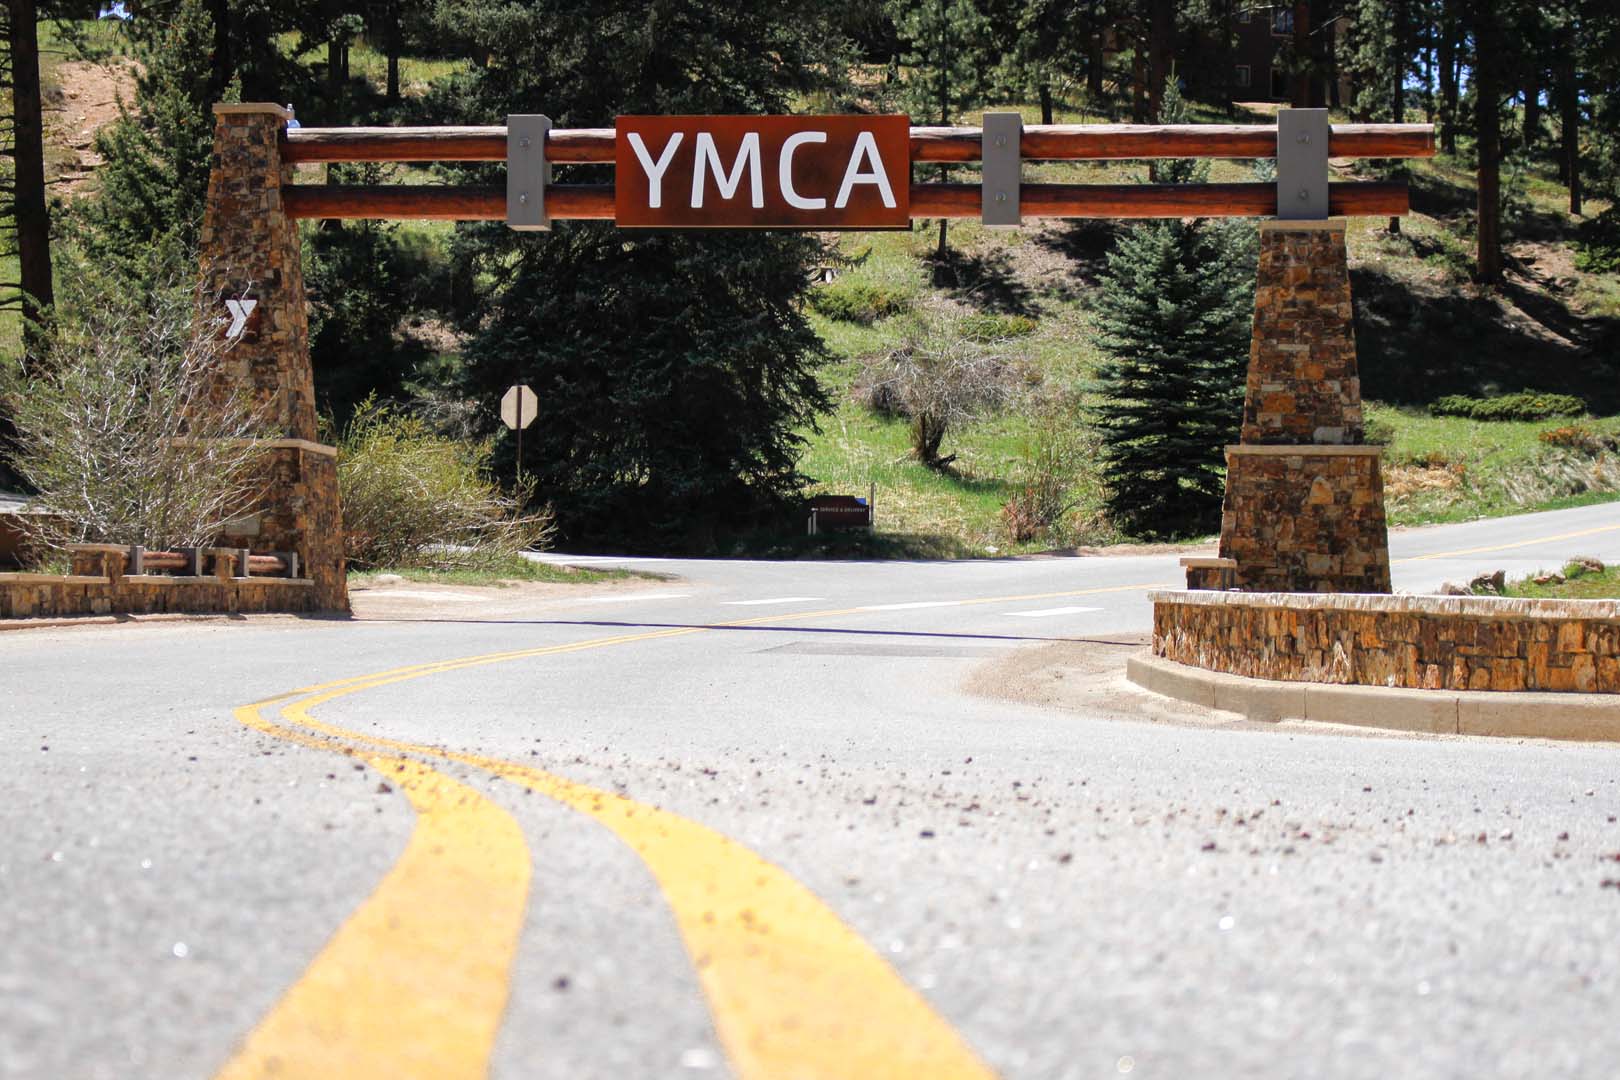 YMCA entrance and street view